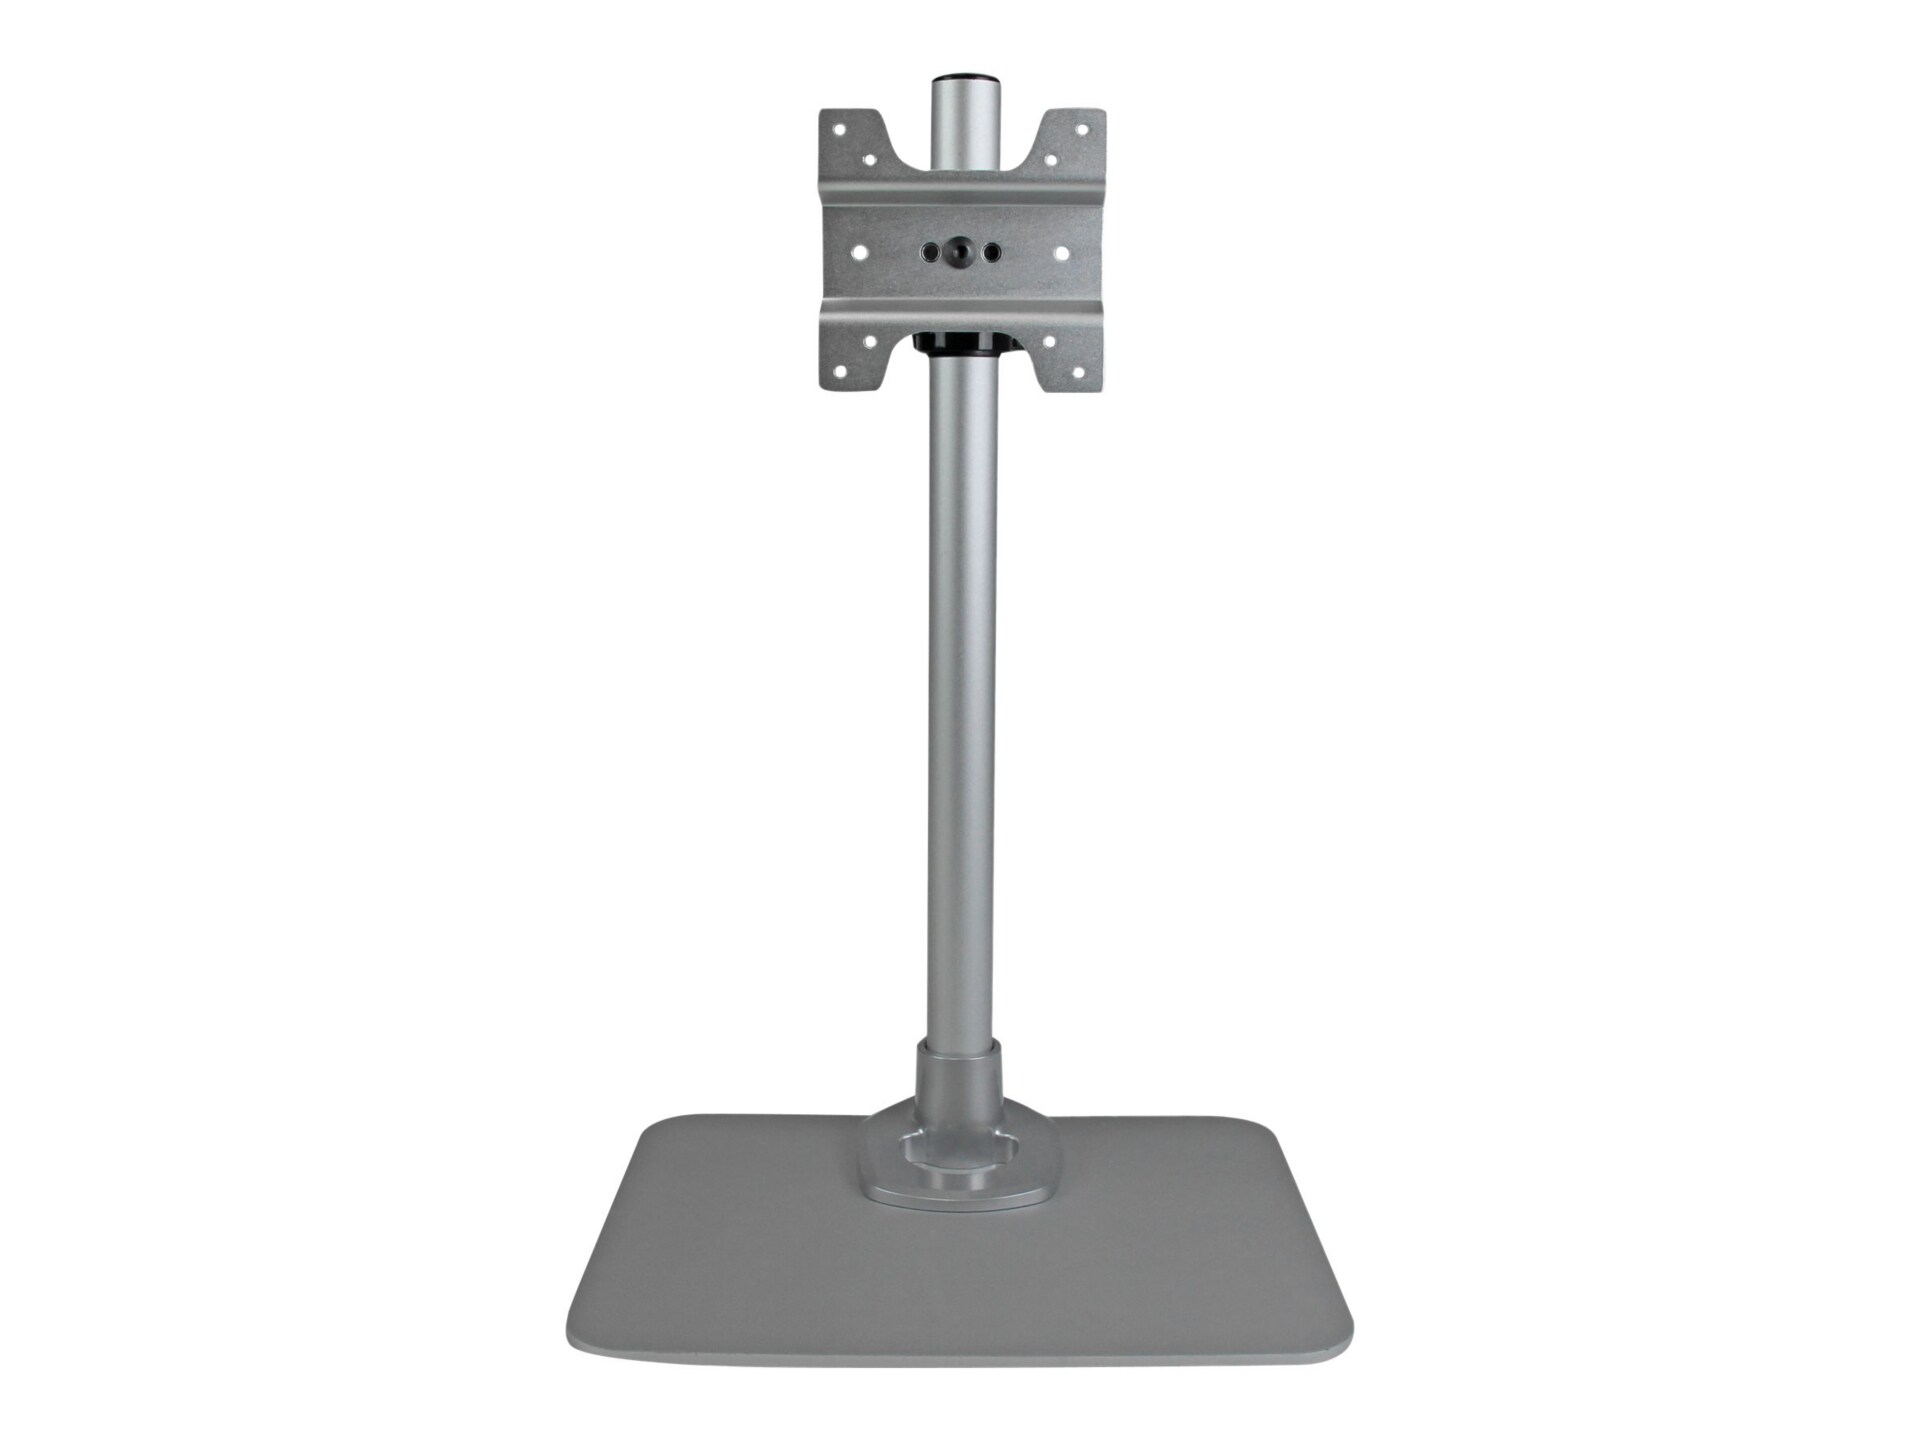 StarTech.com Single Monitor Stand, For up to 34" (30.9lb/14kg) VESA Mount Monitors, Works with iMac / Apple Cinema